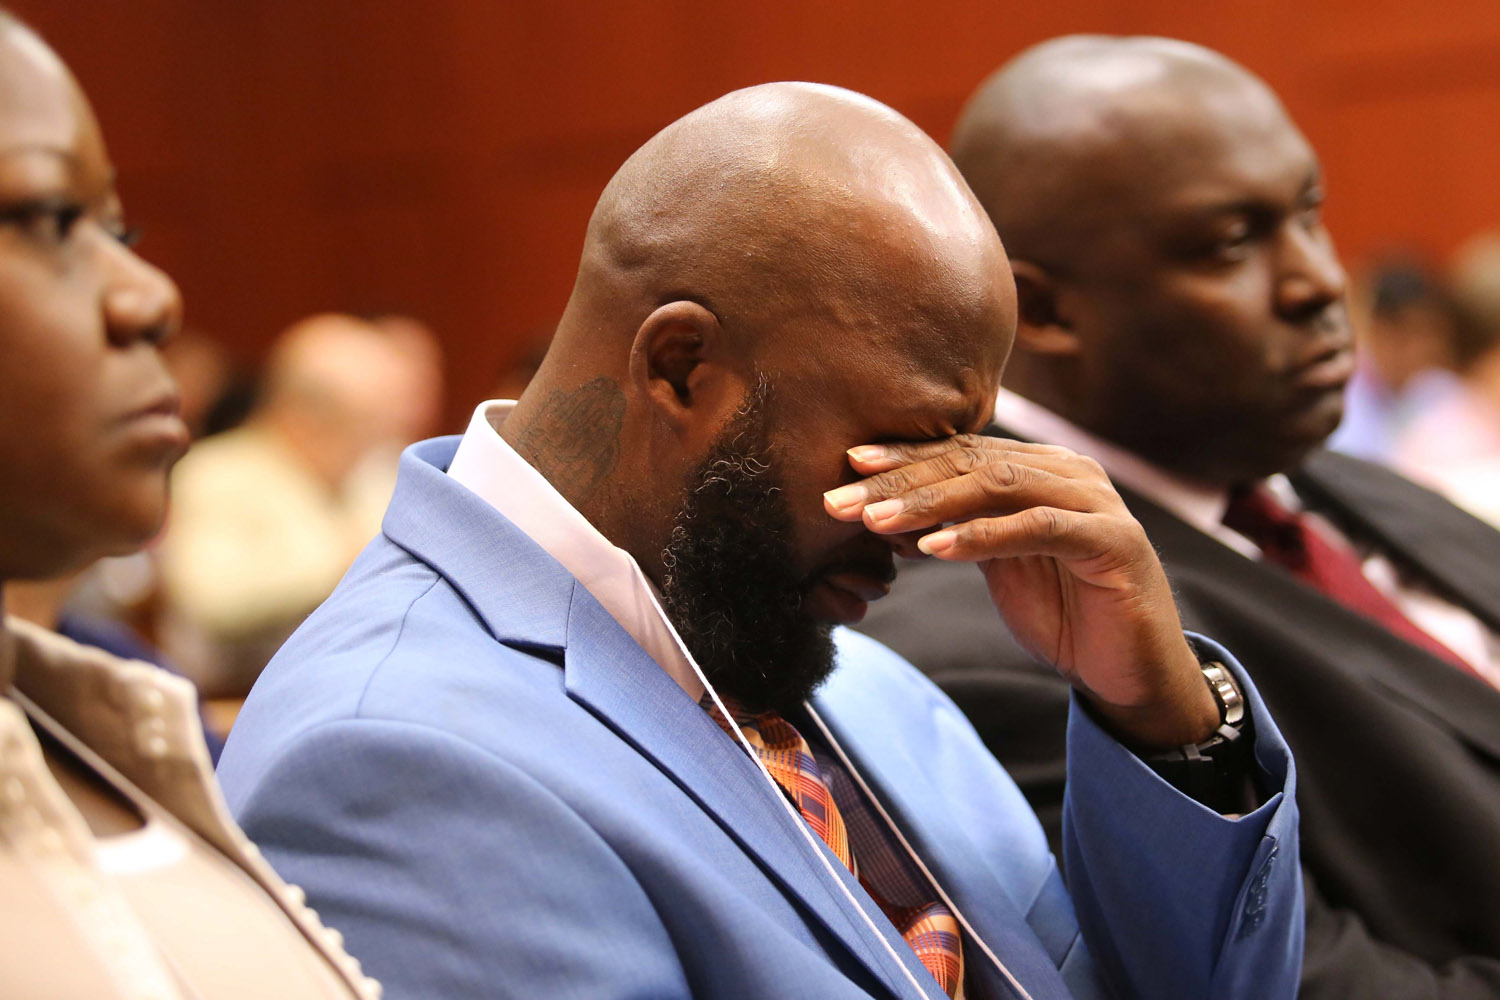 June 24, 2013. The father of  Trayvon Martin, Tracy Martin, cries as he listens to the description of his son's death, with Sybrina Fulton, Trayvon's mother, at left, and Daryl Parks, a family attorney, at right, during the 11th day of the George Zimmerman trial in Seminole circuit court in Sanford, Fla.